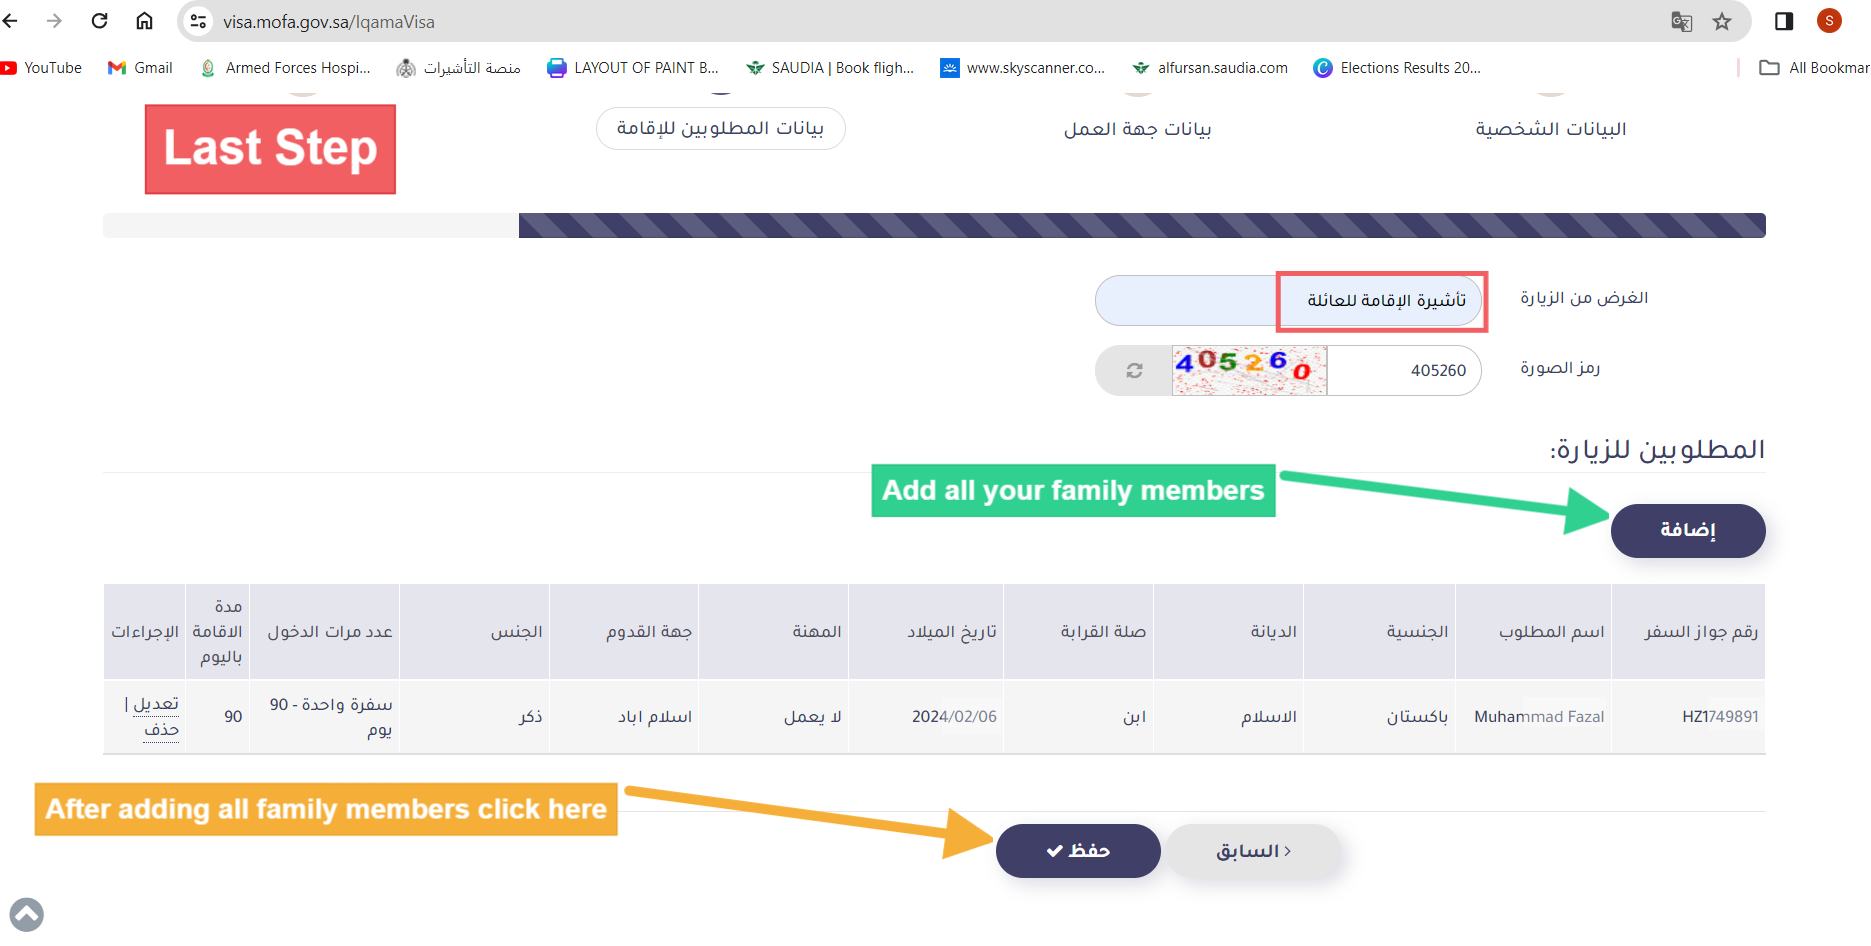 https://eitmadsa.com/gallery_images/How to apply iqama visa 6.png